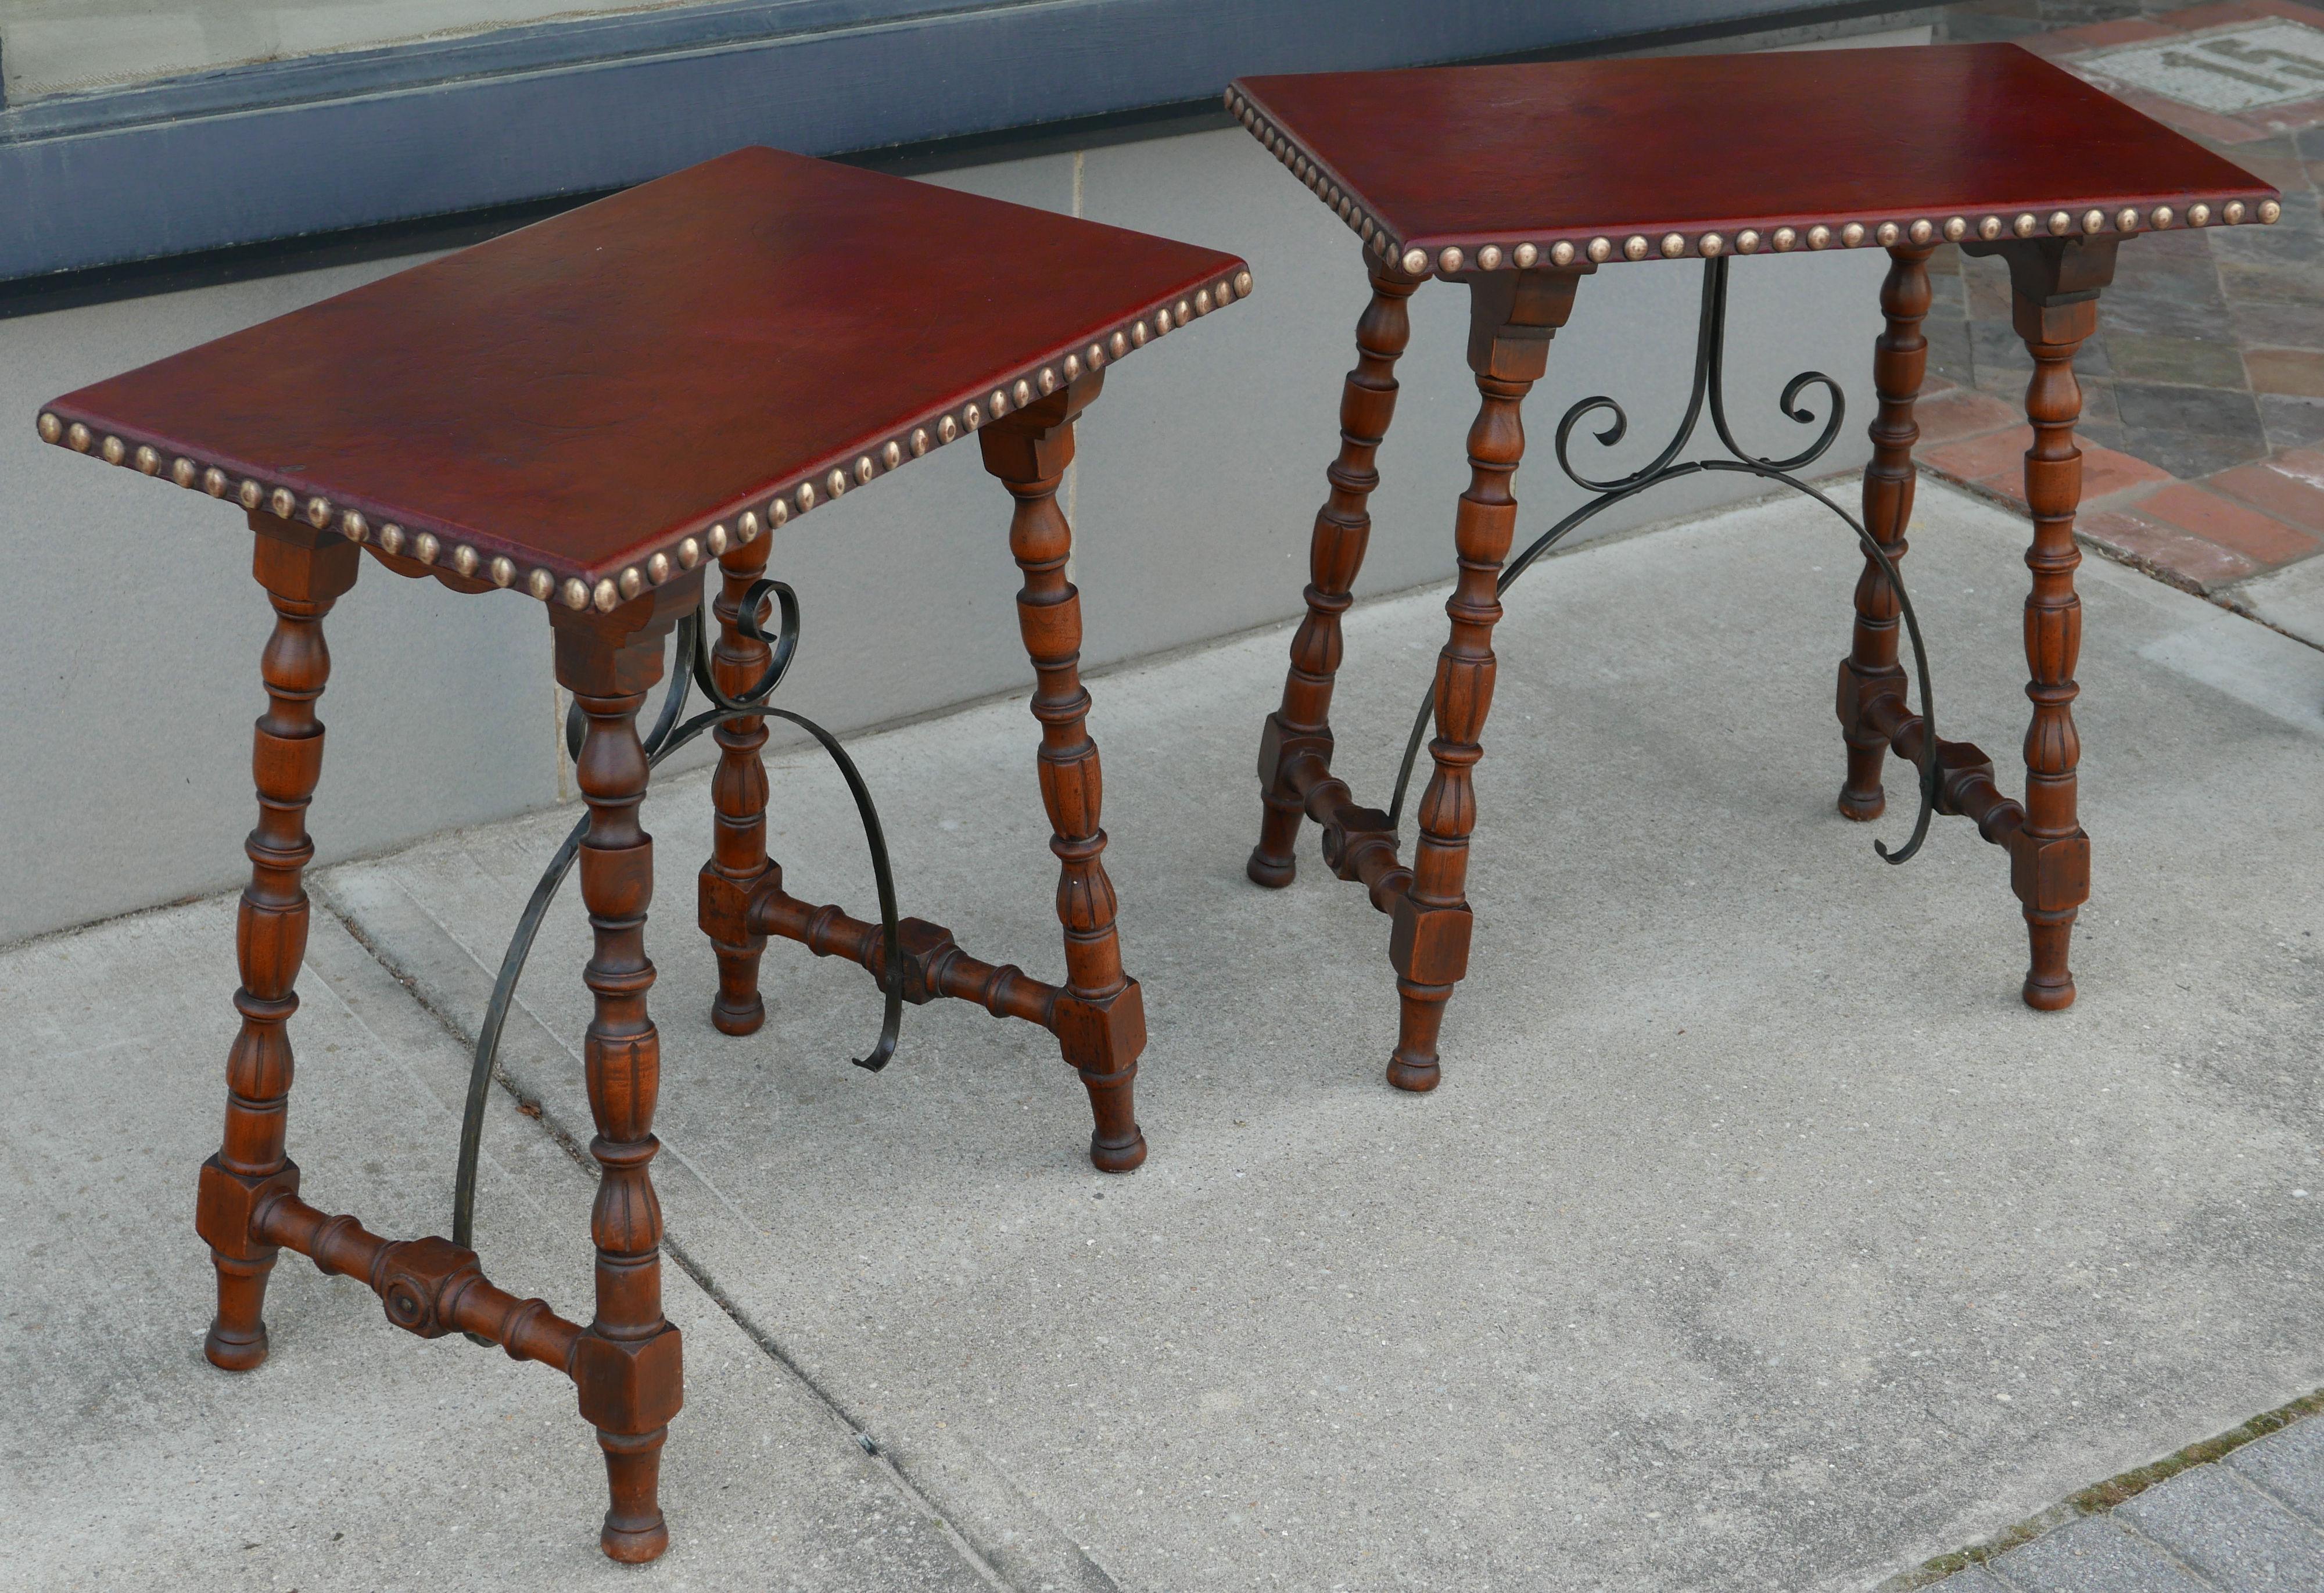 Wonderful leather top tables with large nailhead trim and Spanish colonial base in solid oiled walnut with forged iron brackets for the trestle-like base. Rare to see one of these tables, which would fit in wonderfully in a Southwest or southern